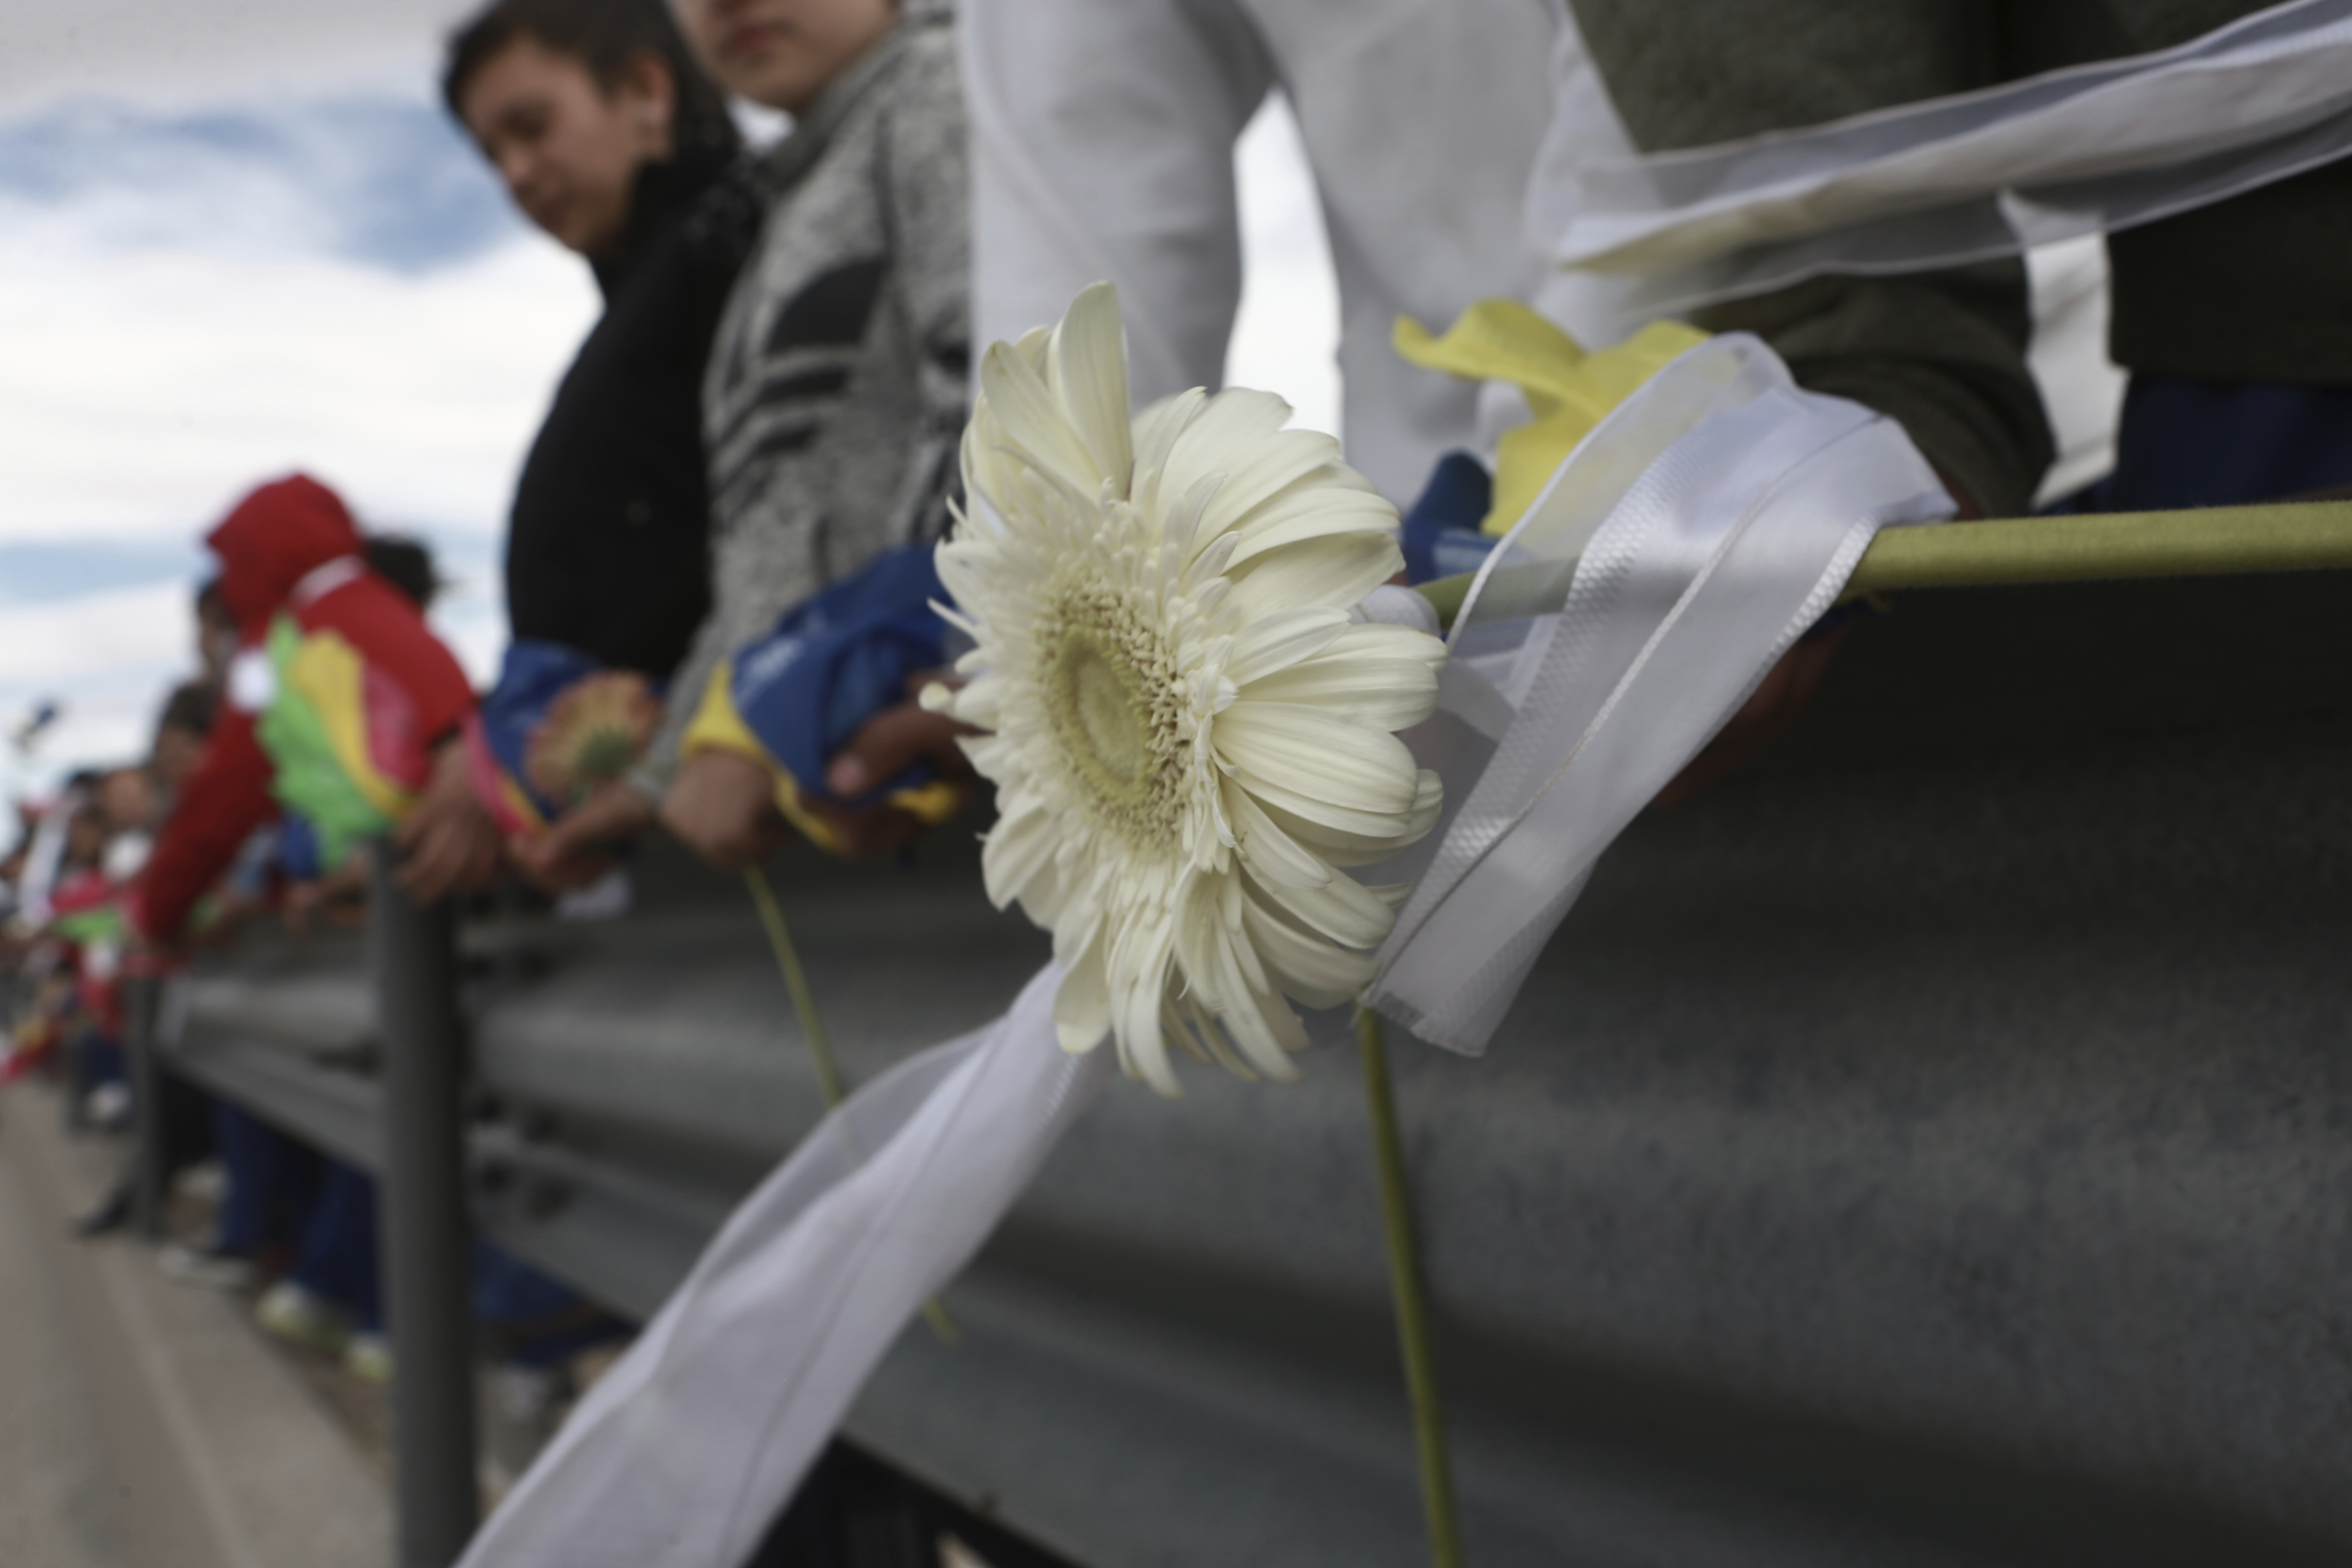 A flower sits on a guard rail as people form a symbolic human wall along the Rio Grande, which marks the border between Mexico and the U.S. in Ciudad Juarez, Friday, Feb. 17, 2017. Responding to plans by President Donald Trump to build a wall along the length of the U.S.-Mexico border, more than a thousand people lined the Mexican bank of the Rio Grande in Ciudad Juarez Friday, holding hands and carrying flowers.(AP Photo/Christian Torres)